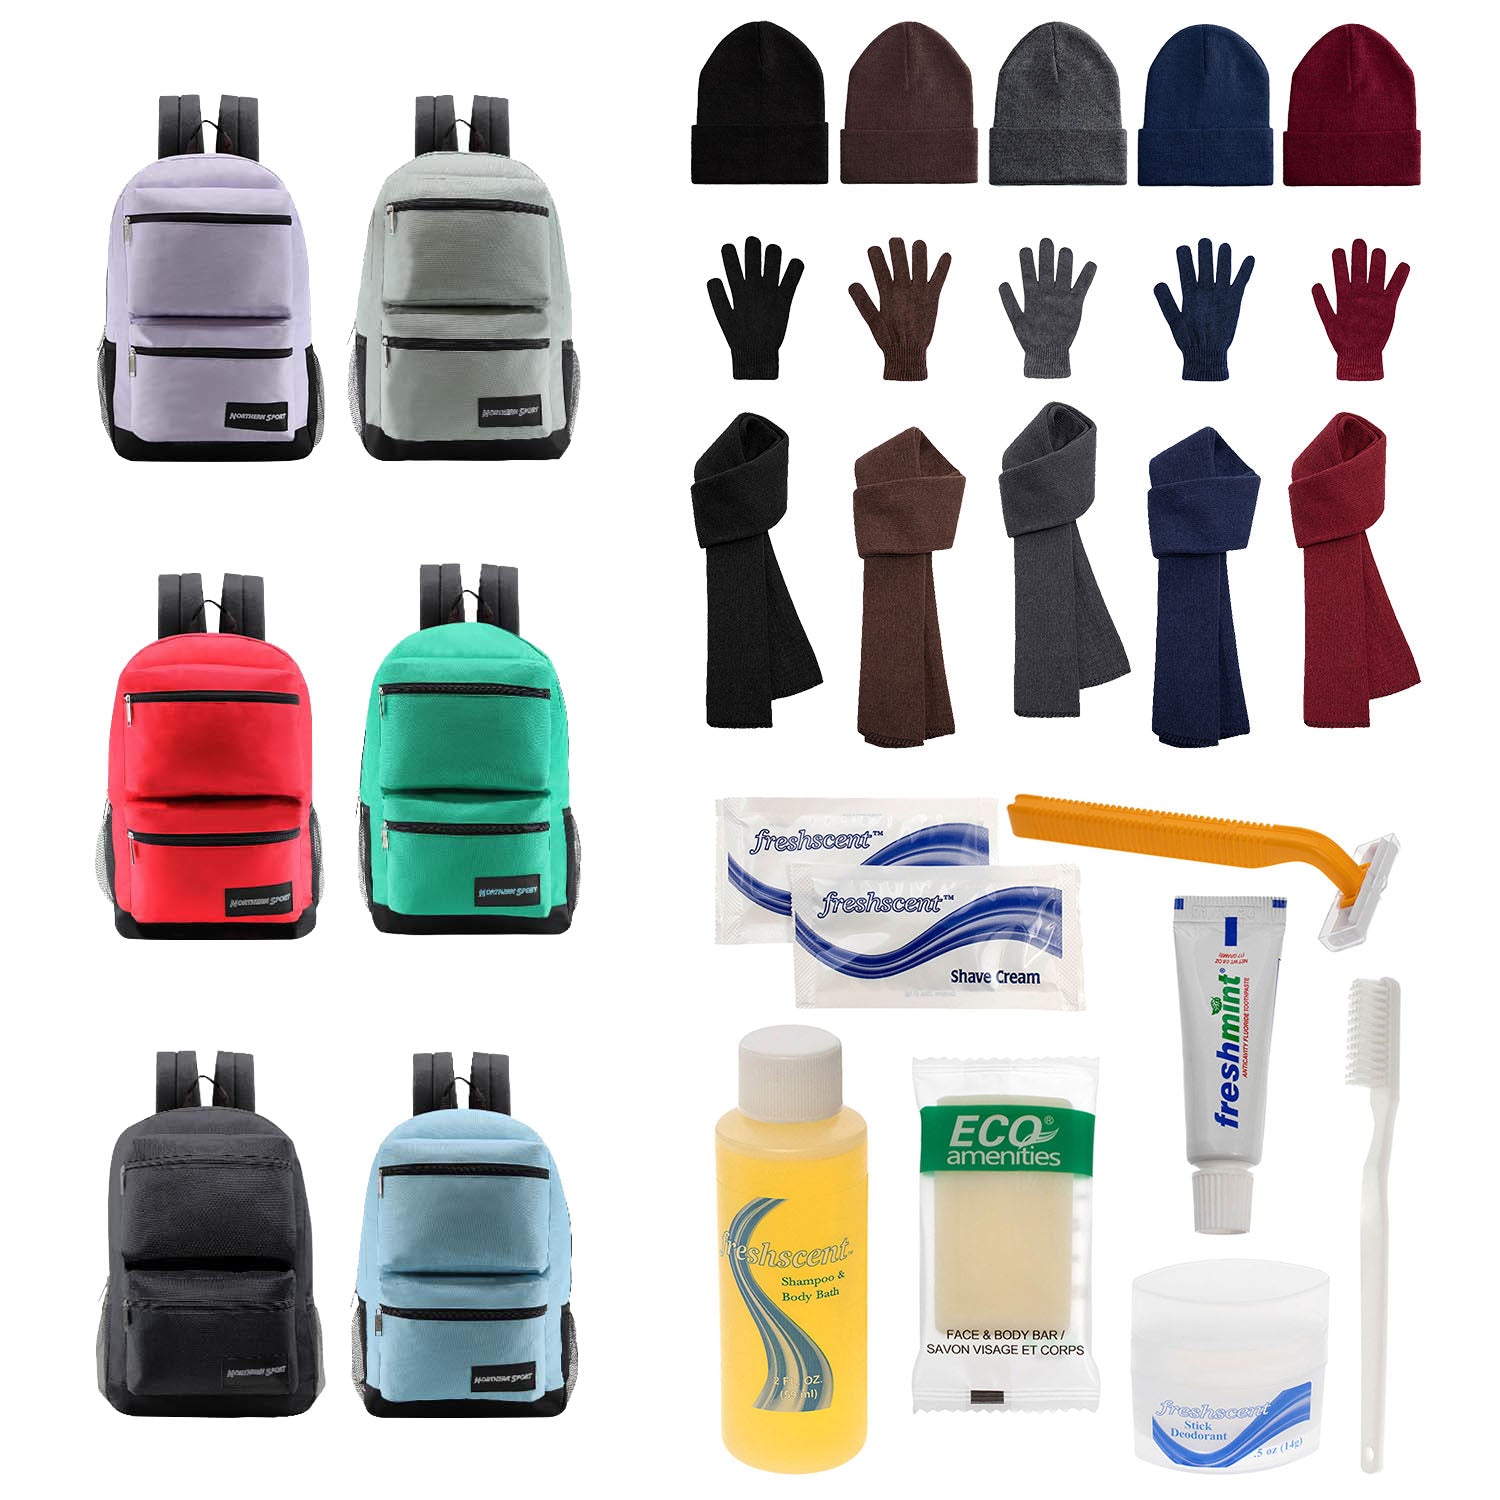 Bulk Case of 12 19" Backpacks and 12 Winter Item Sets and 12 Hygiene Kits - Wholesale Care Package - Emergencies, Homeless, Charity